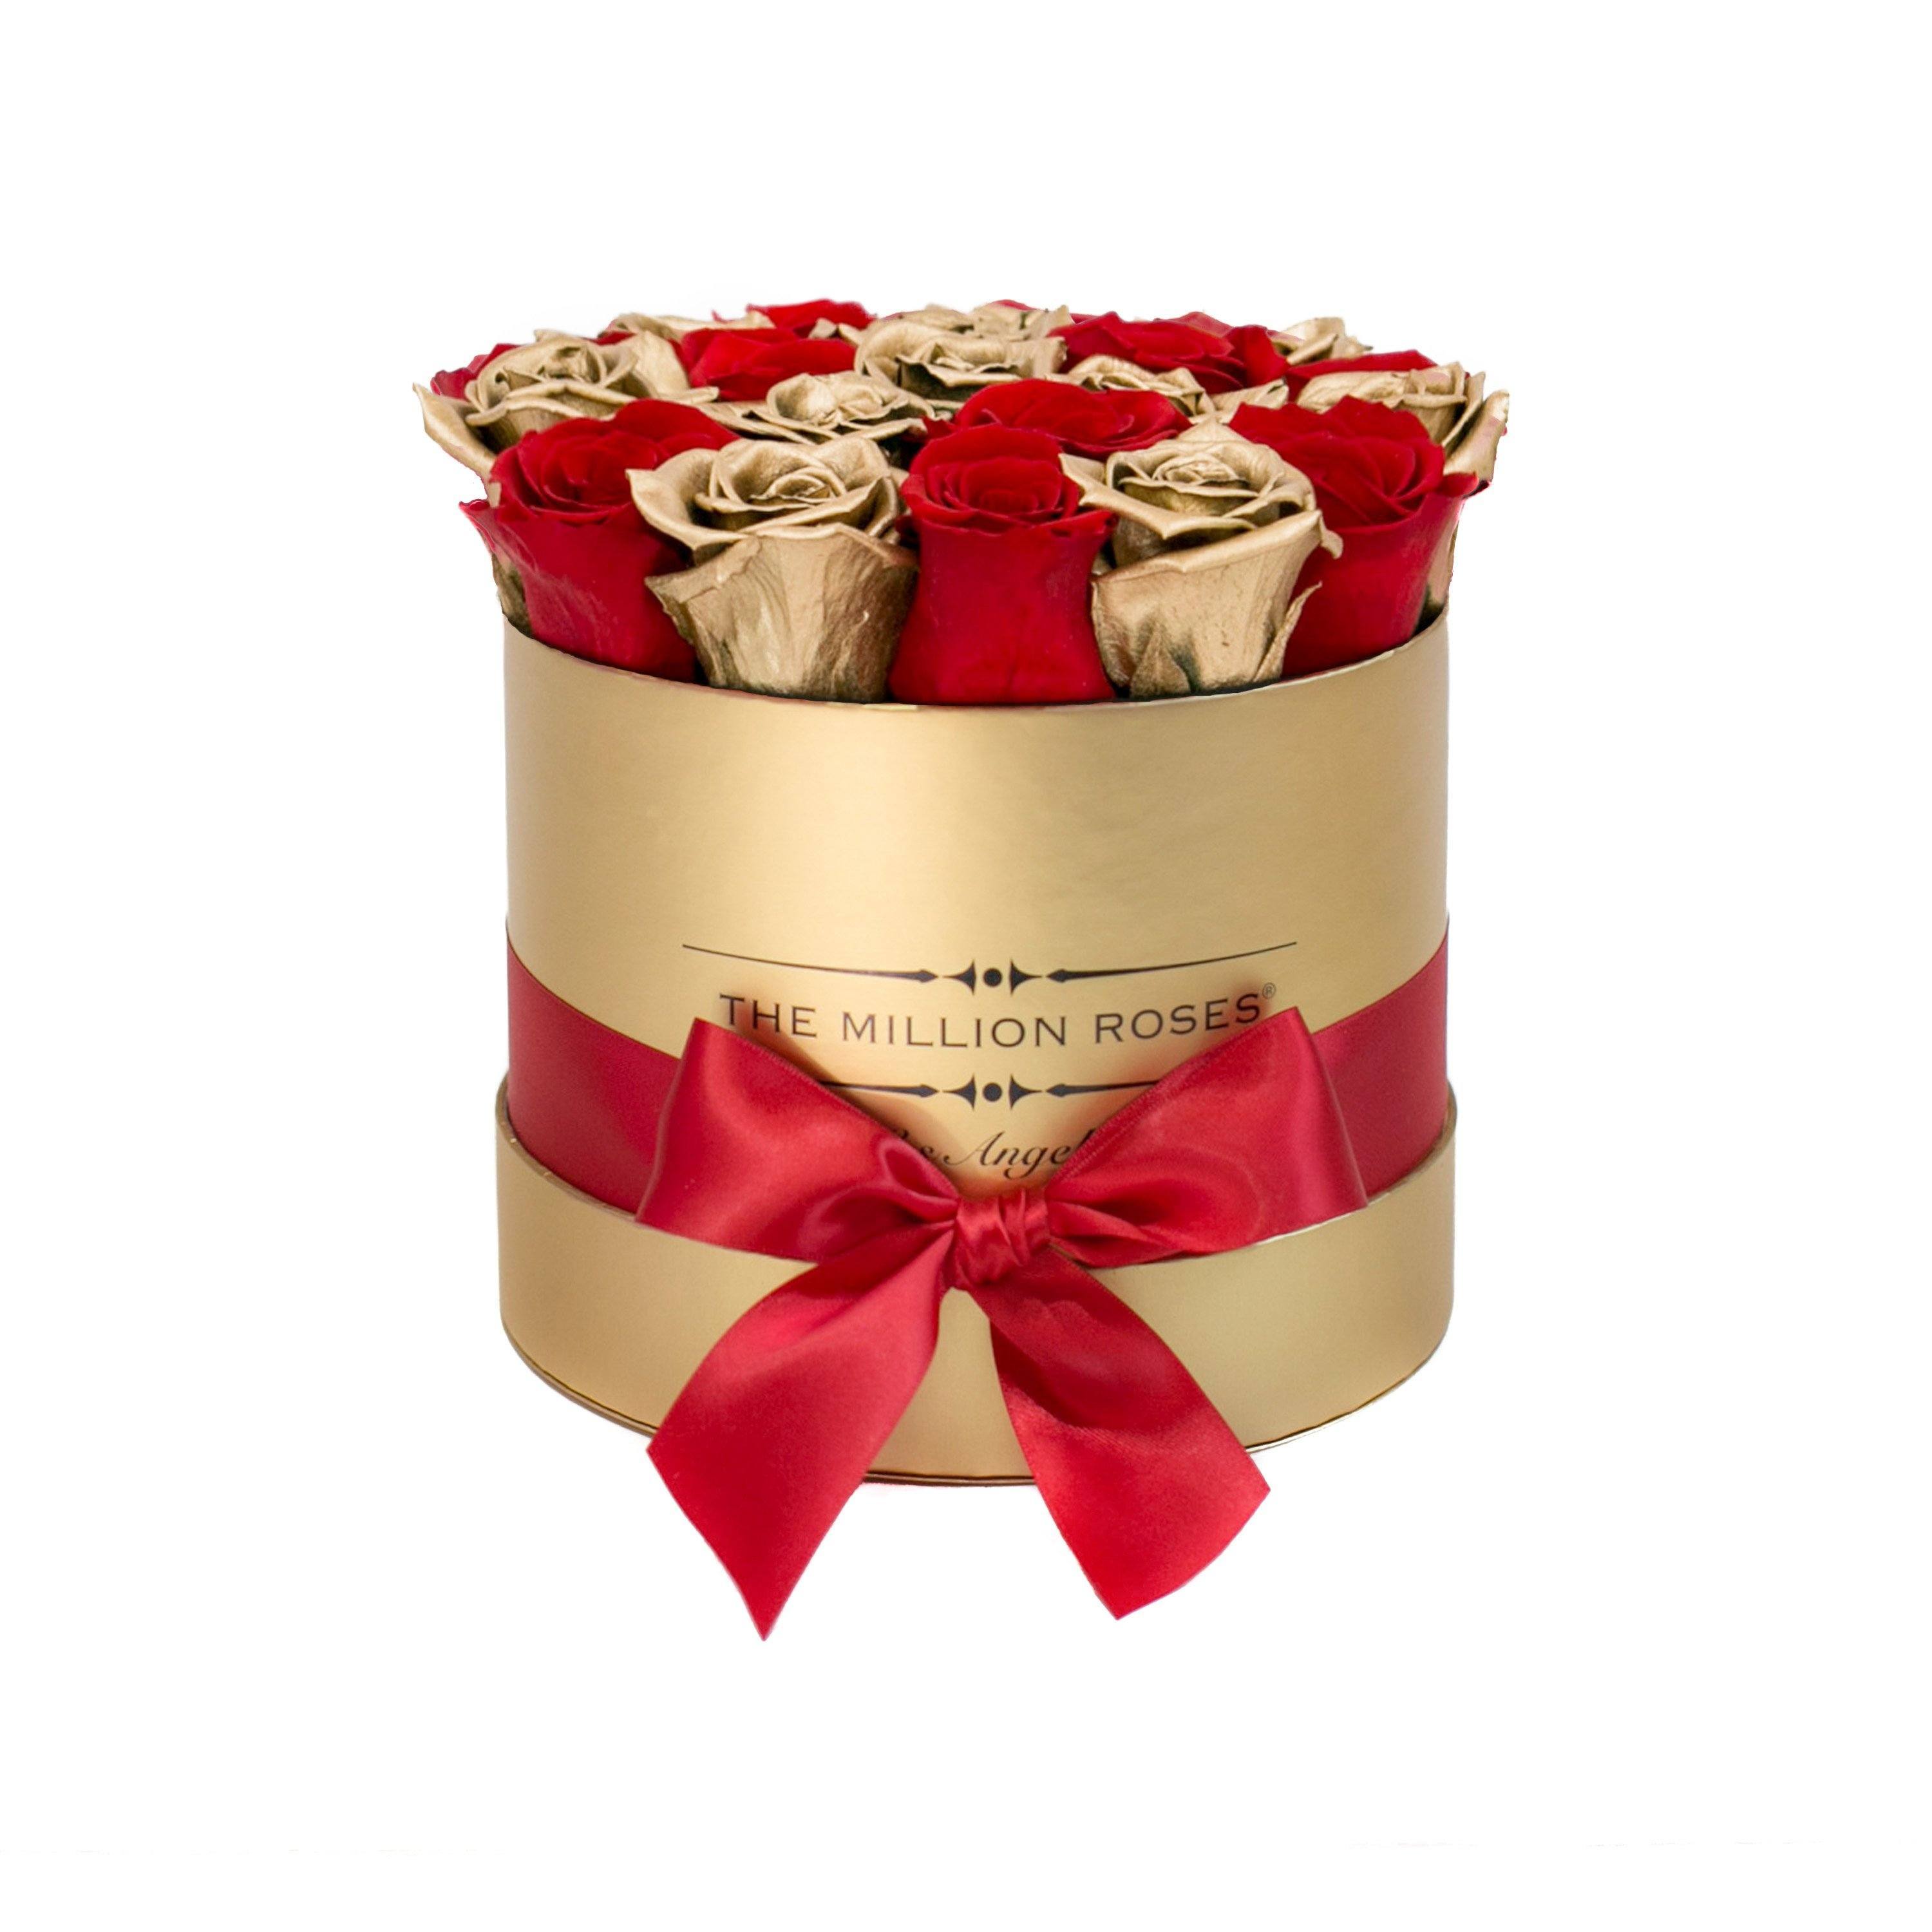 classic round box - gold - red&gold(mix) roses red eternity roses - the million roses